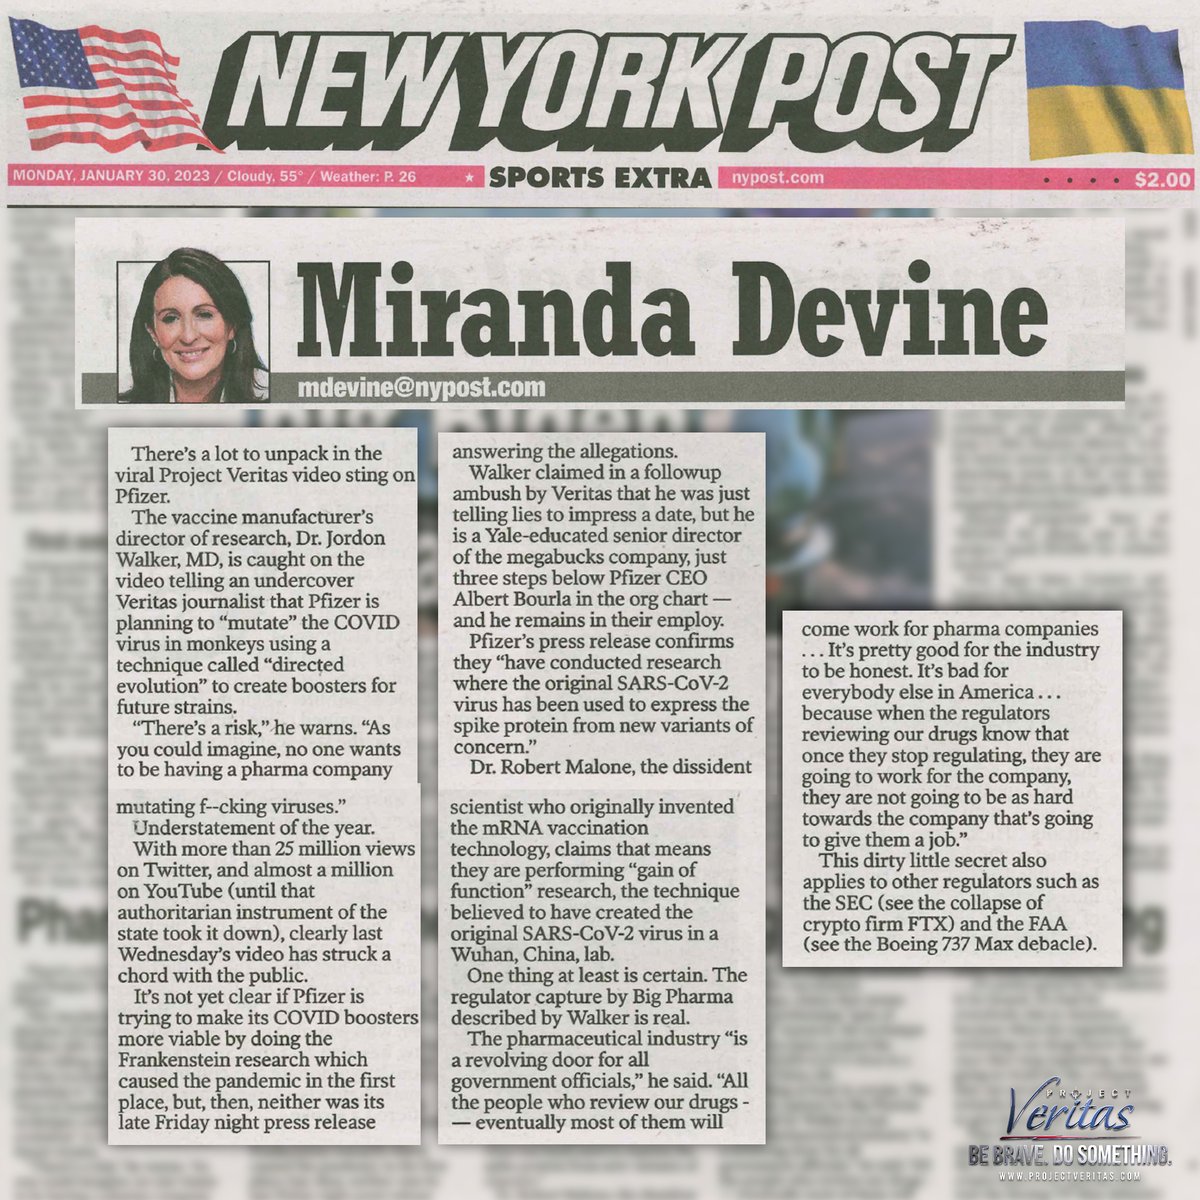 Read more about the article Bombshell #DirectedEvolution Story Hits @nypost written by @mirandadevine 

“‘Th